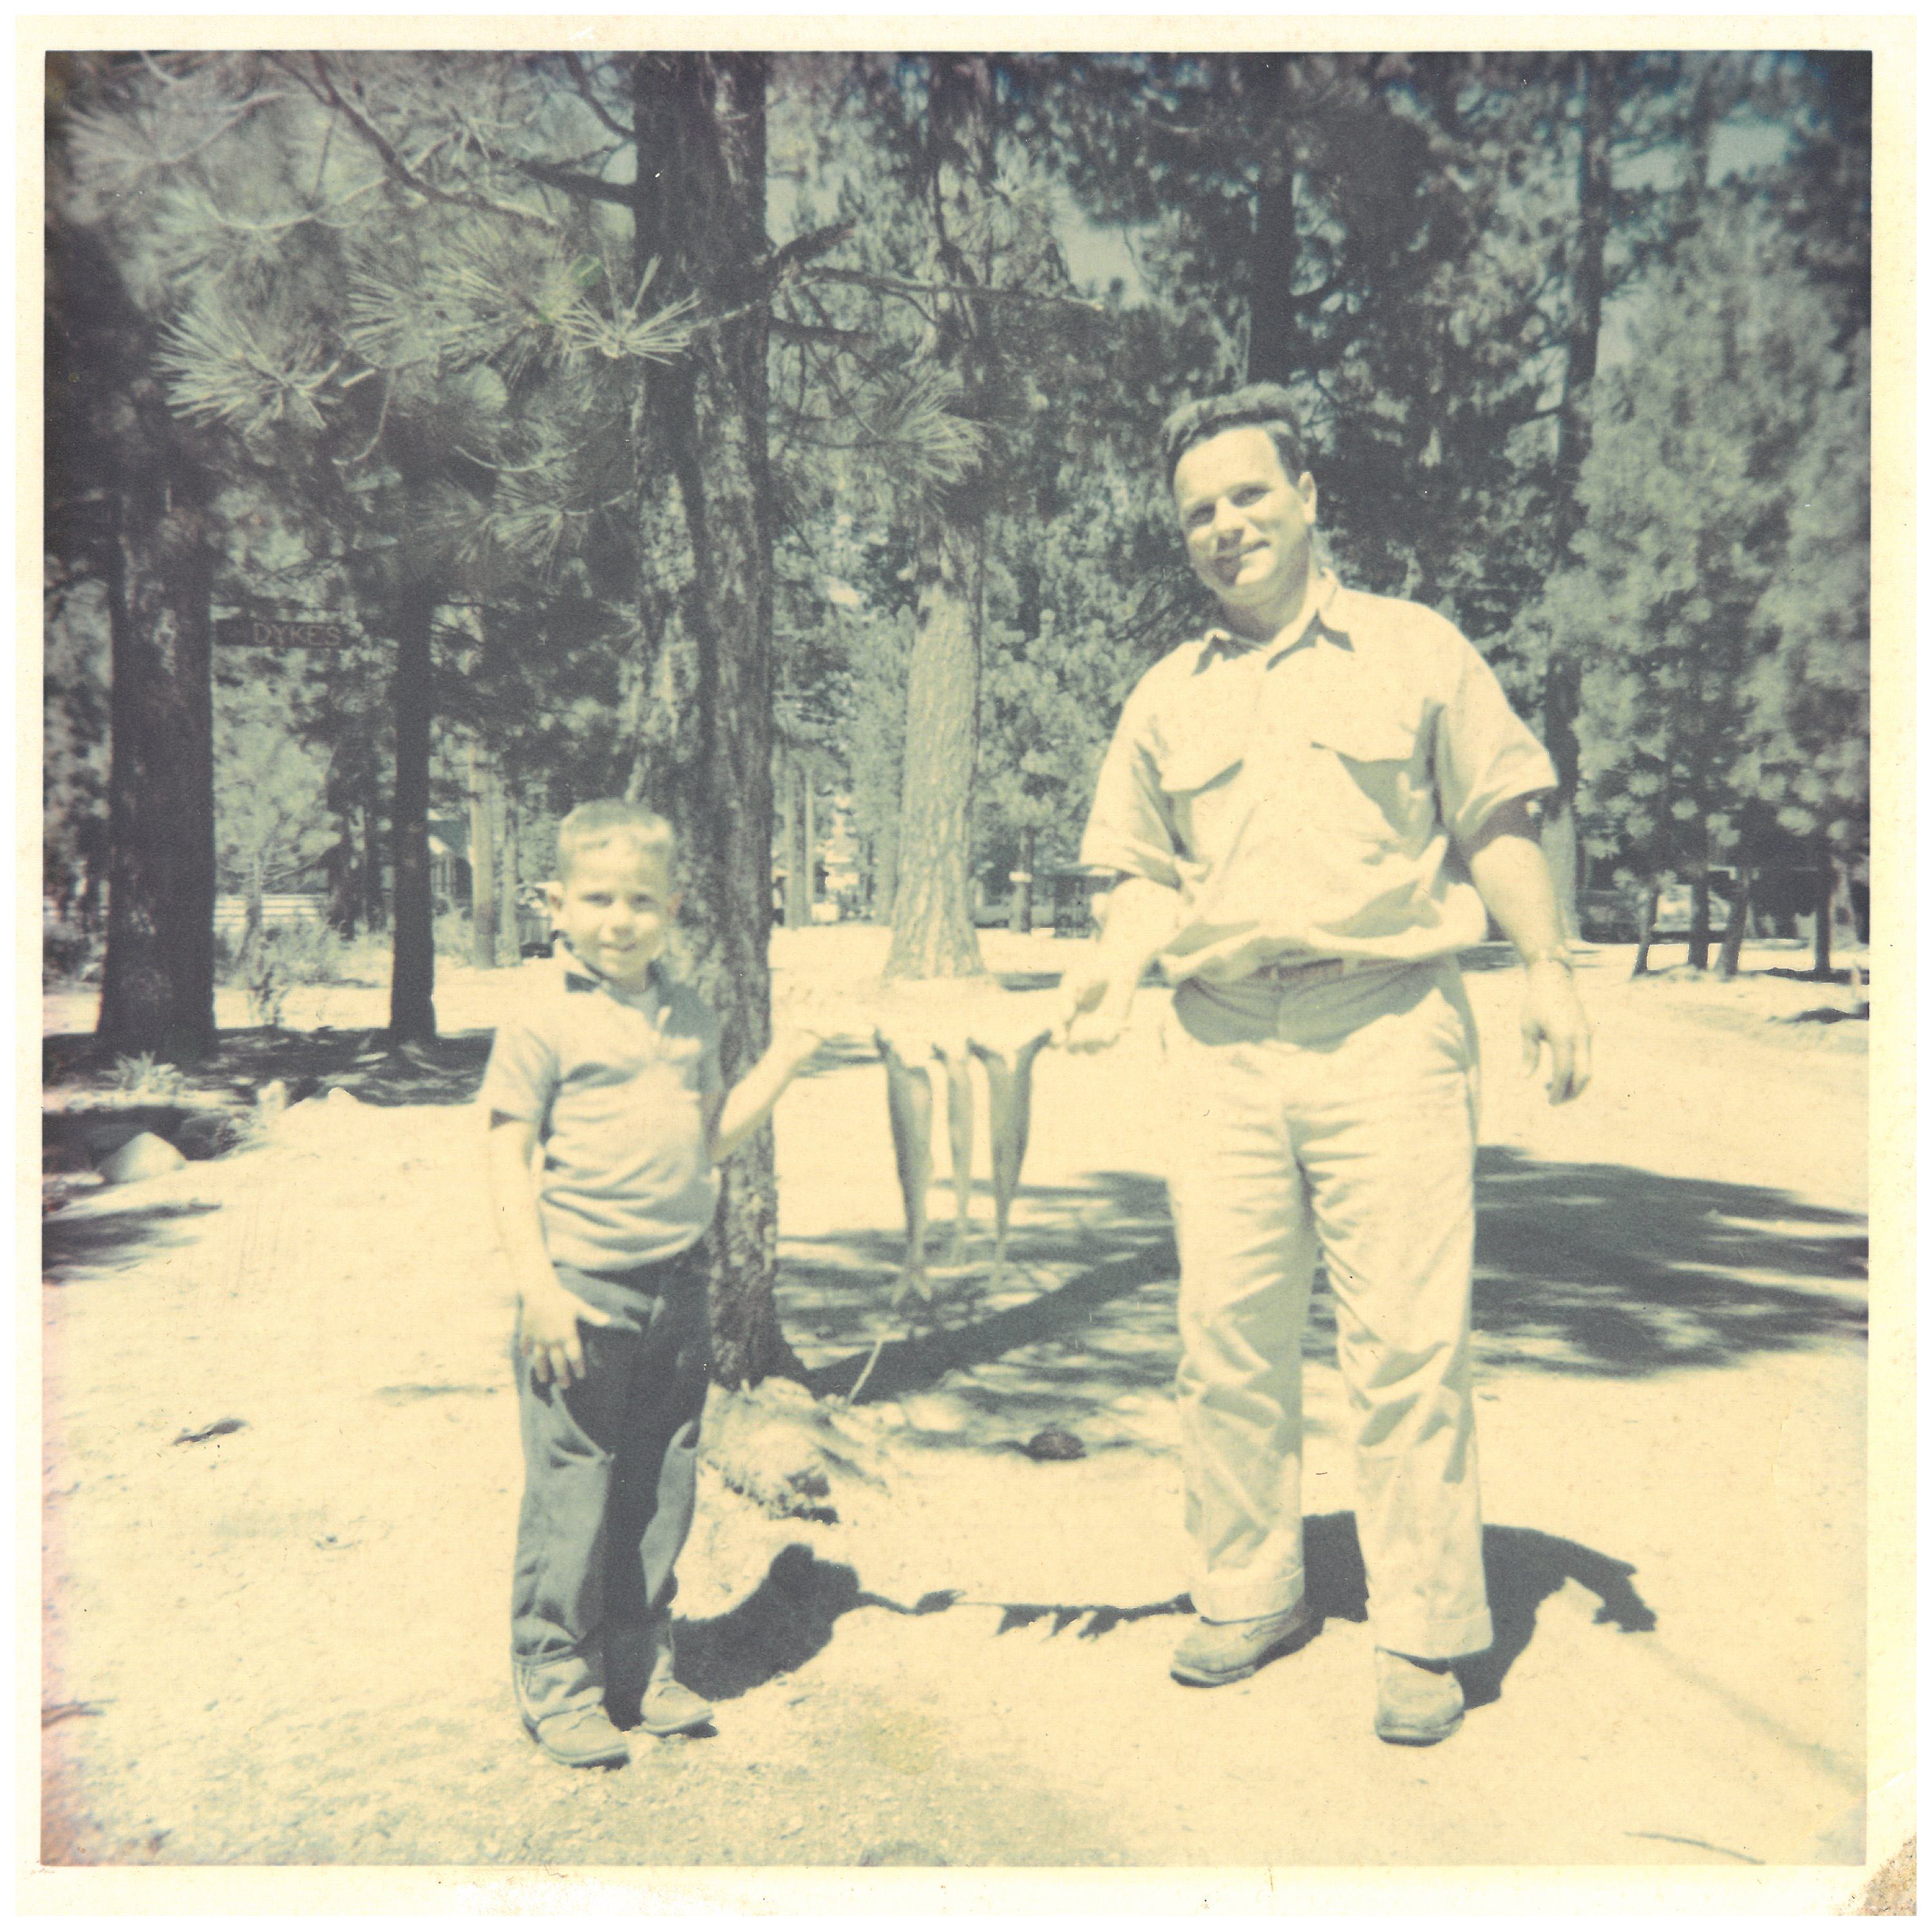 Marc Mondavi attributes his love of fishing to his father, the late Peter Mondavi Sr. (Pictured here together when Marc was a boy).